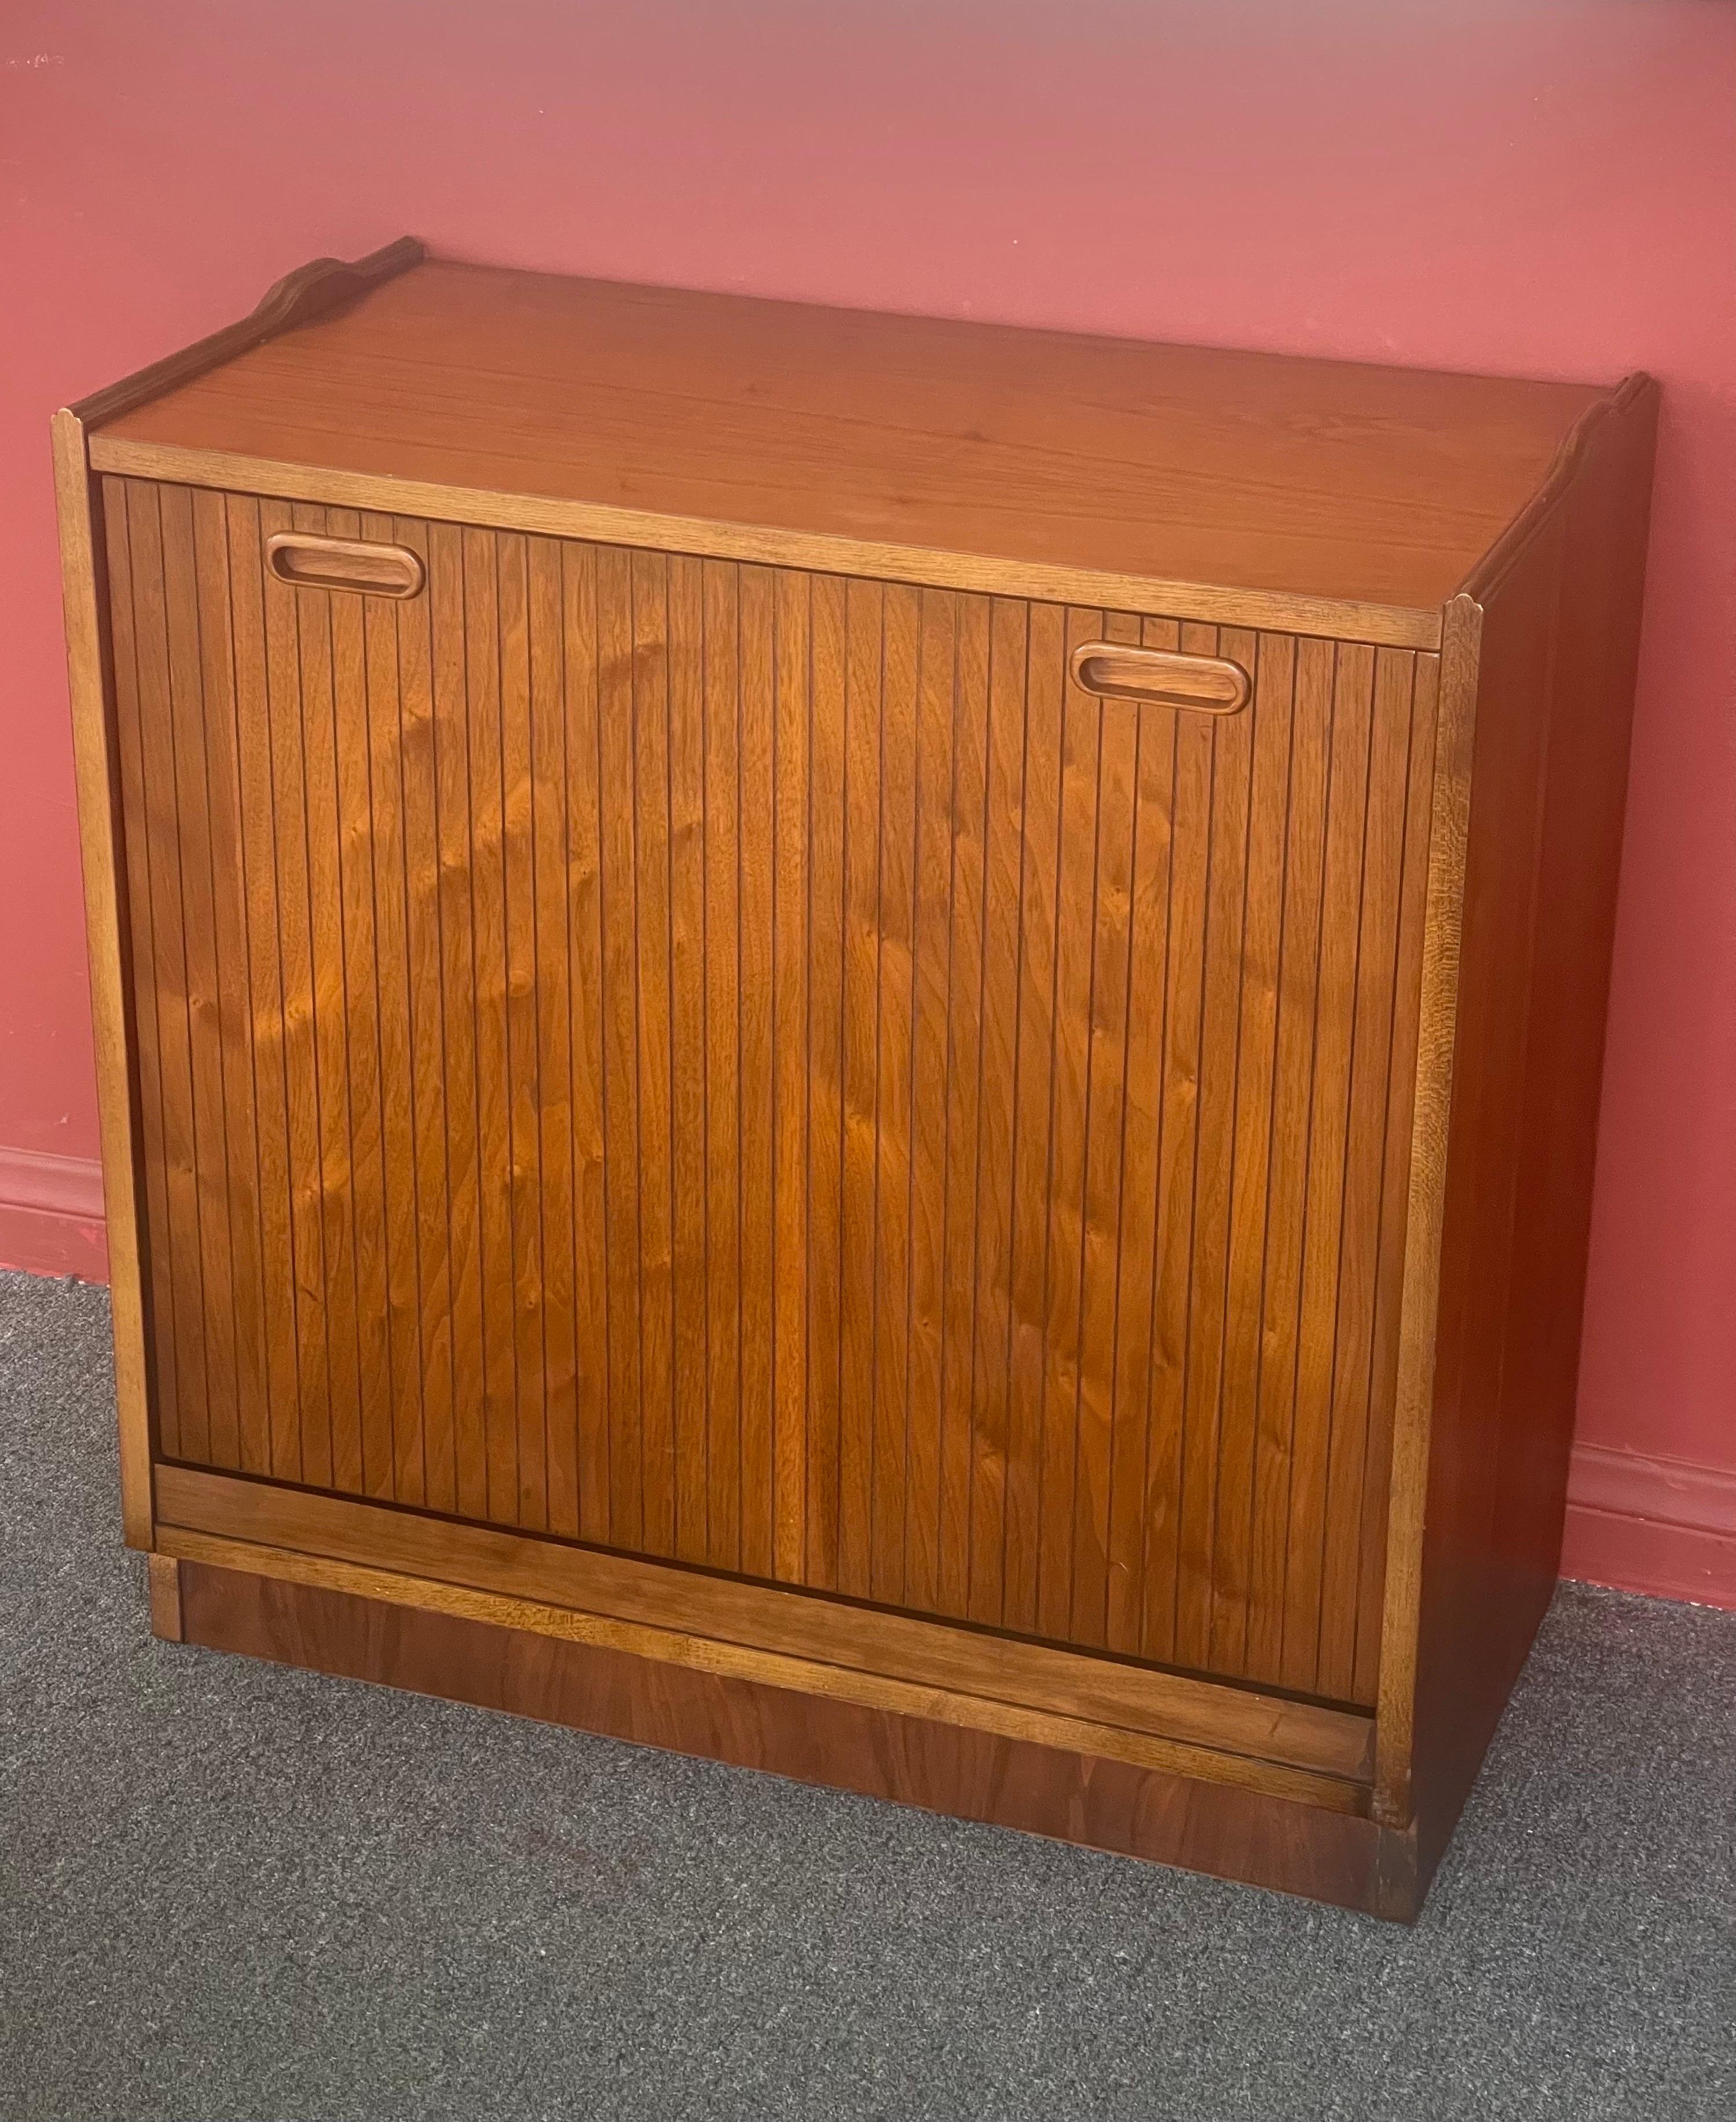 A very clean American modern walnut record cabinet with pull out door / drawer by Lane Furniture, circa 1970s. The cabinet is designed to hold over 125 12